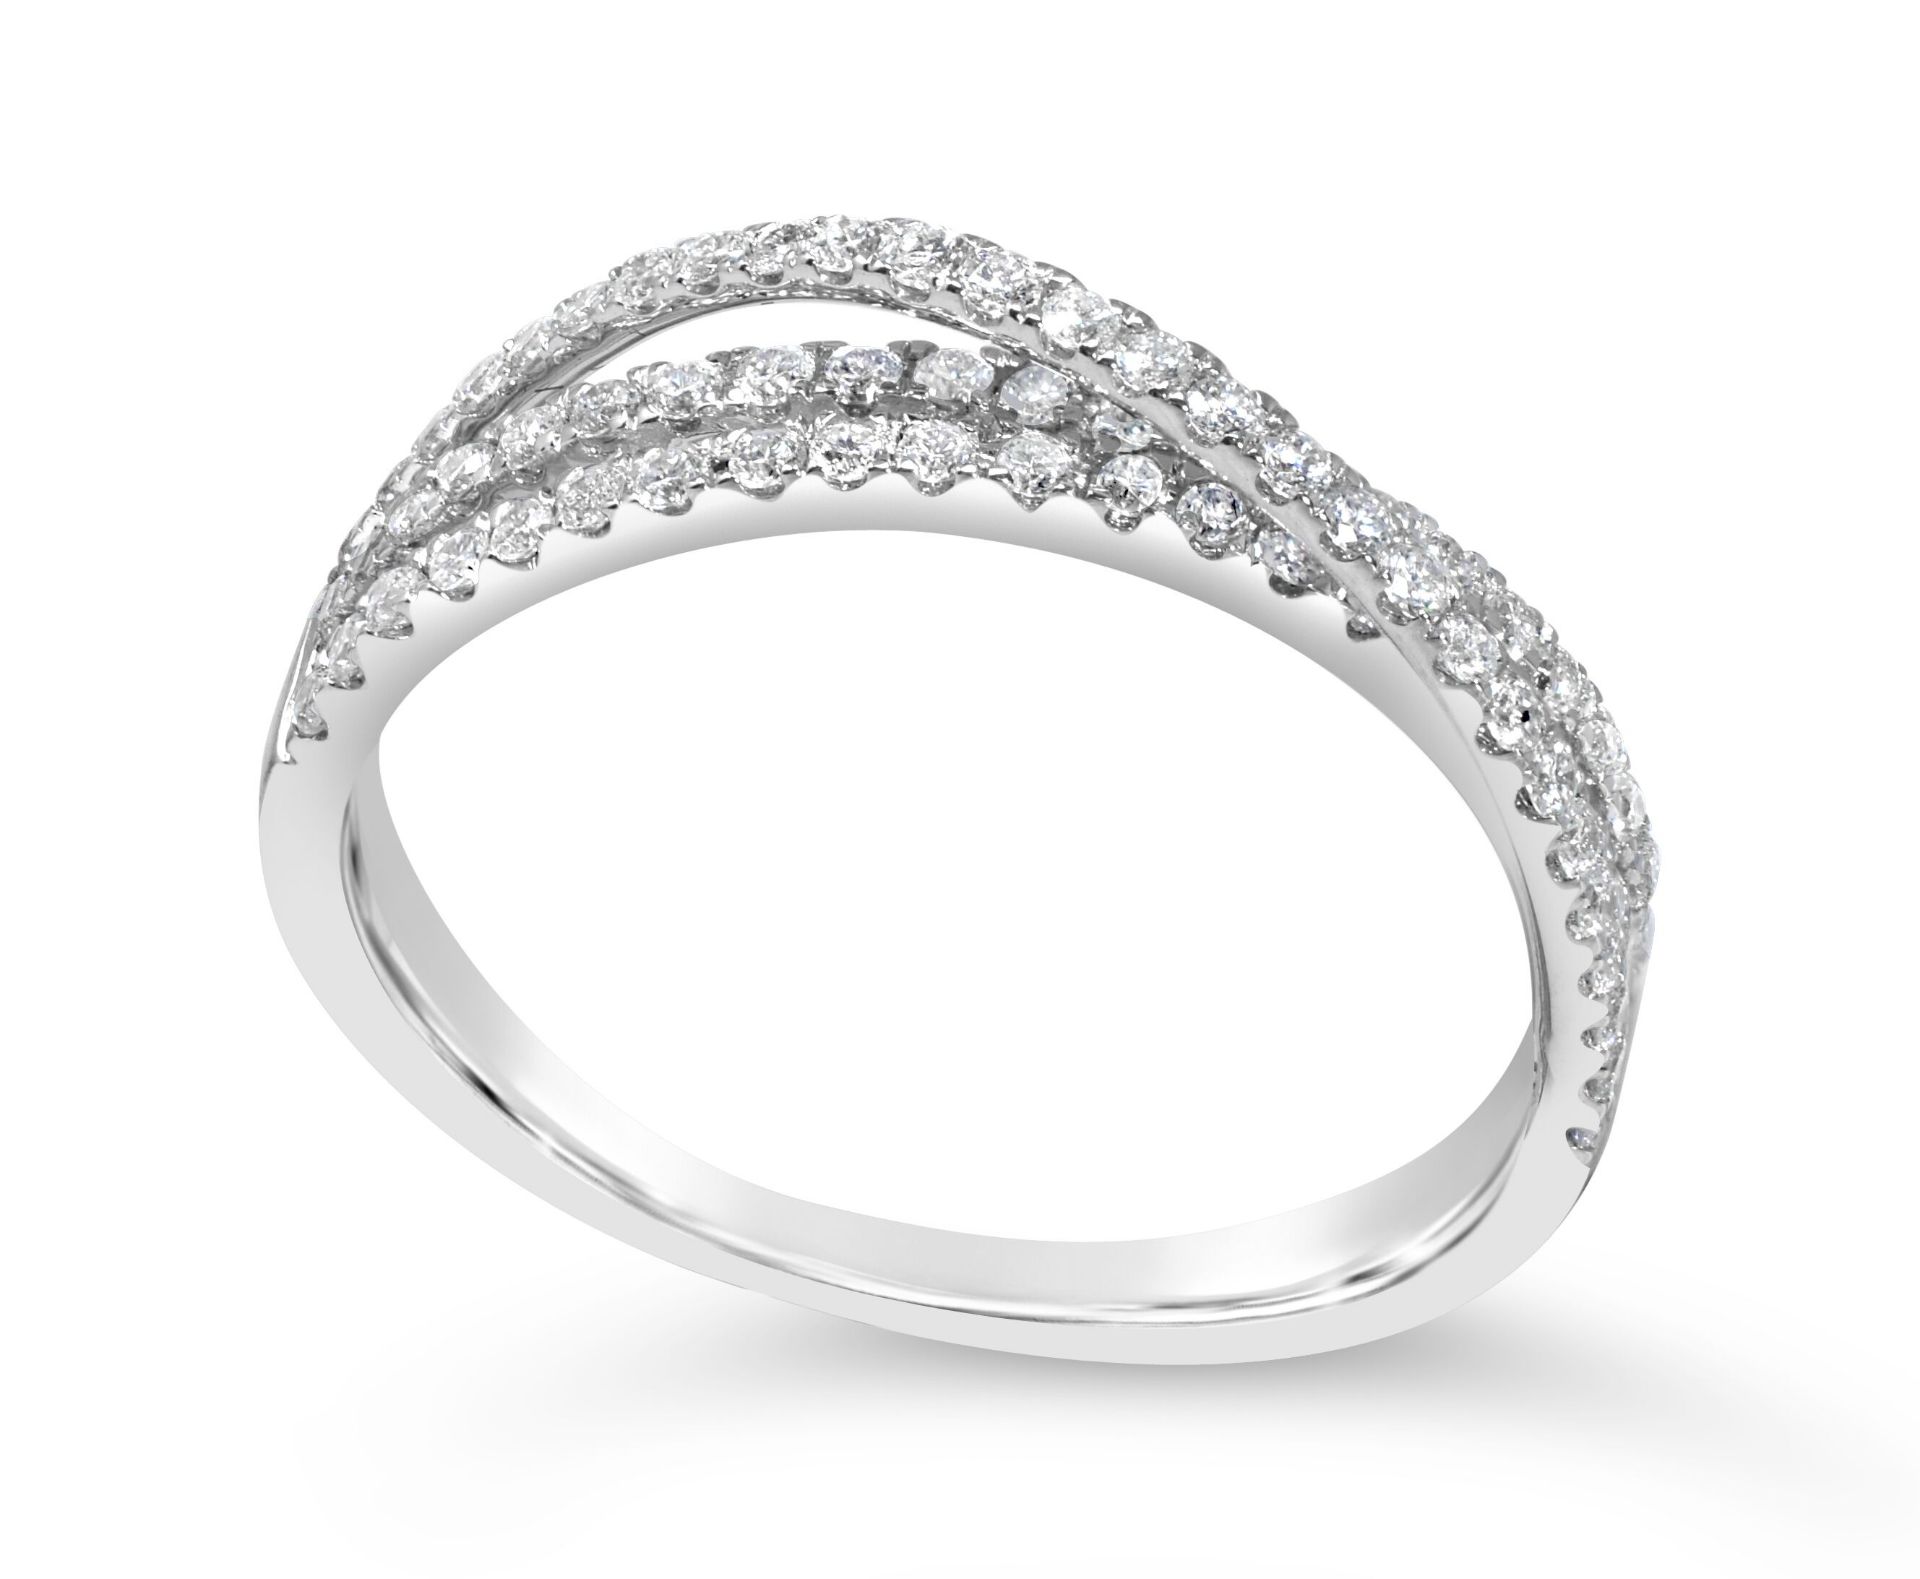 Diamond Eternity Ring For Women in White Gold with - Image 2 of 4